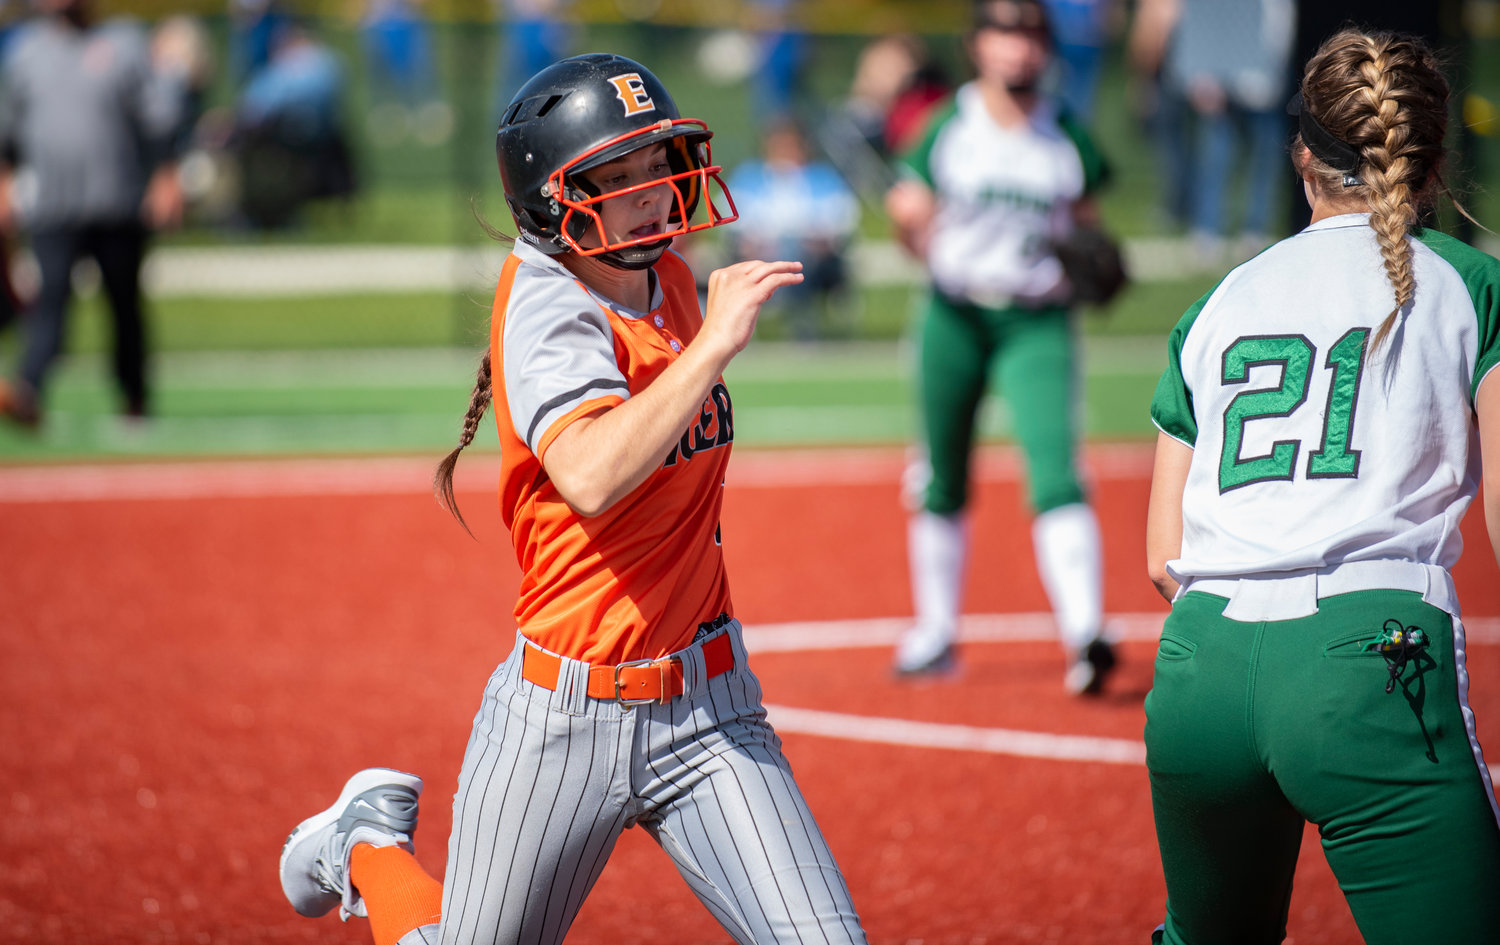 Centralia's Ella Orr sprints to first base against Tumwater on Tuesday.